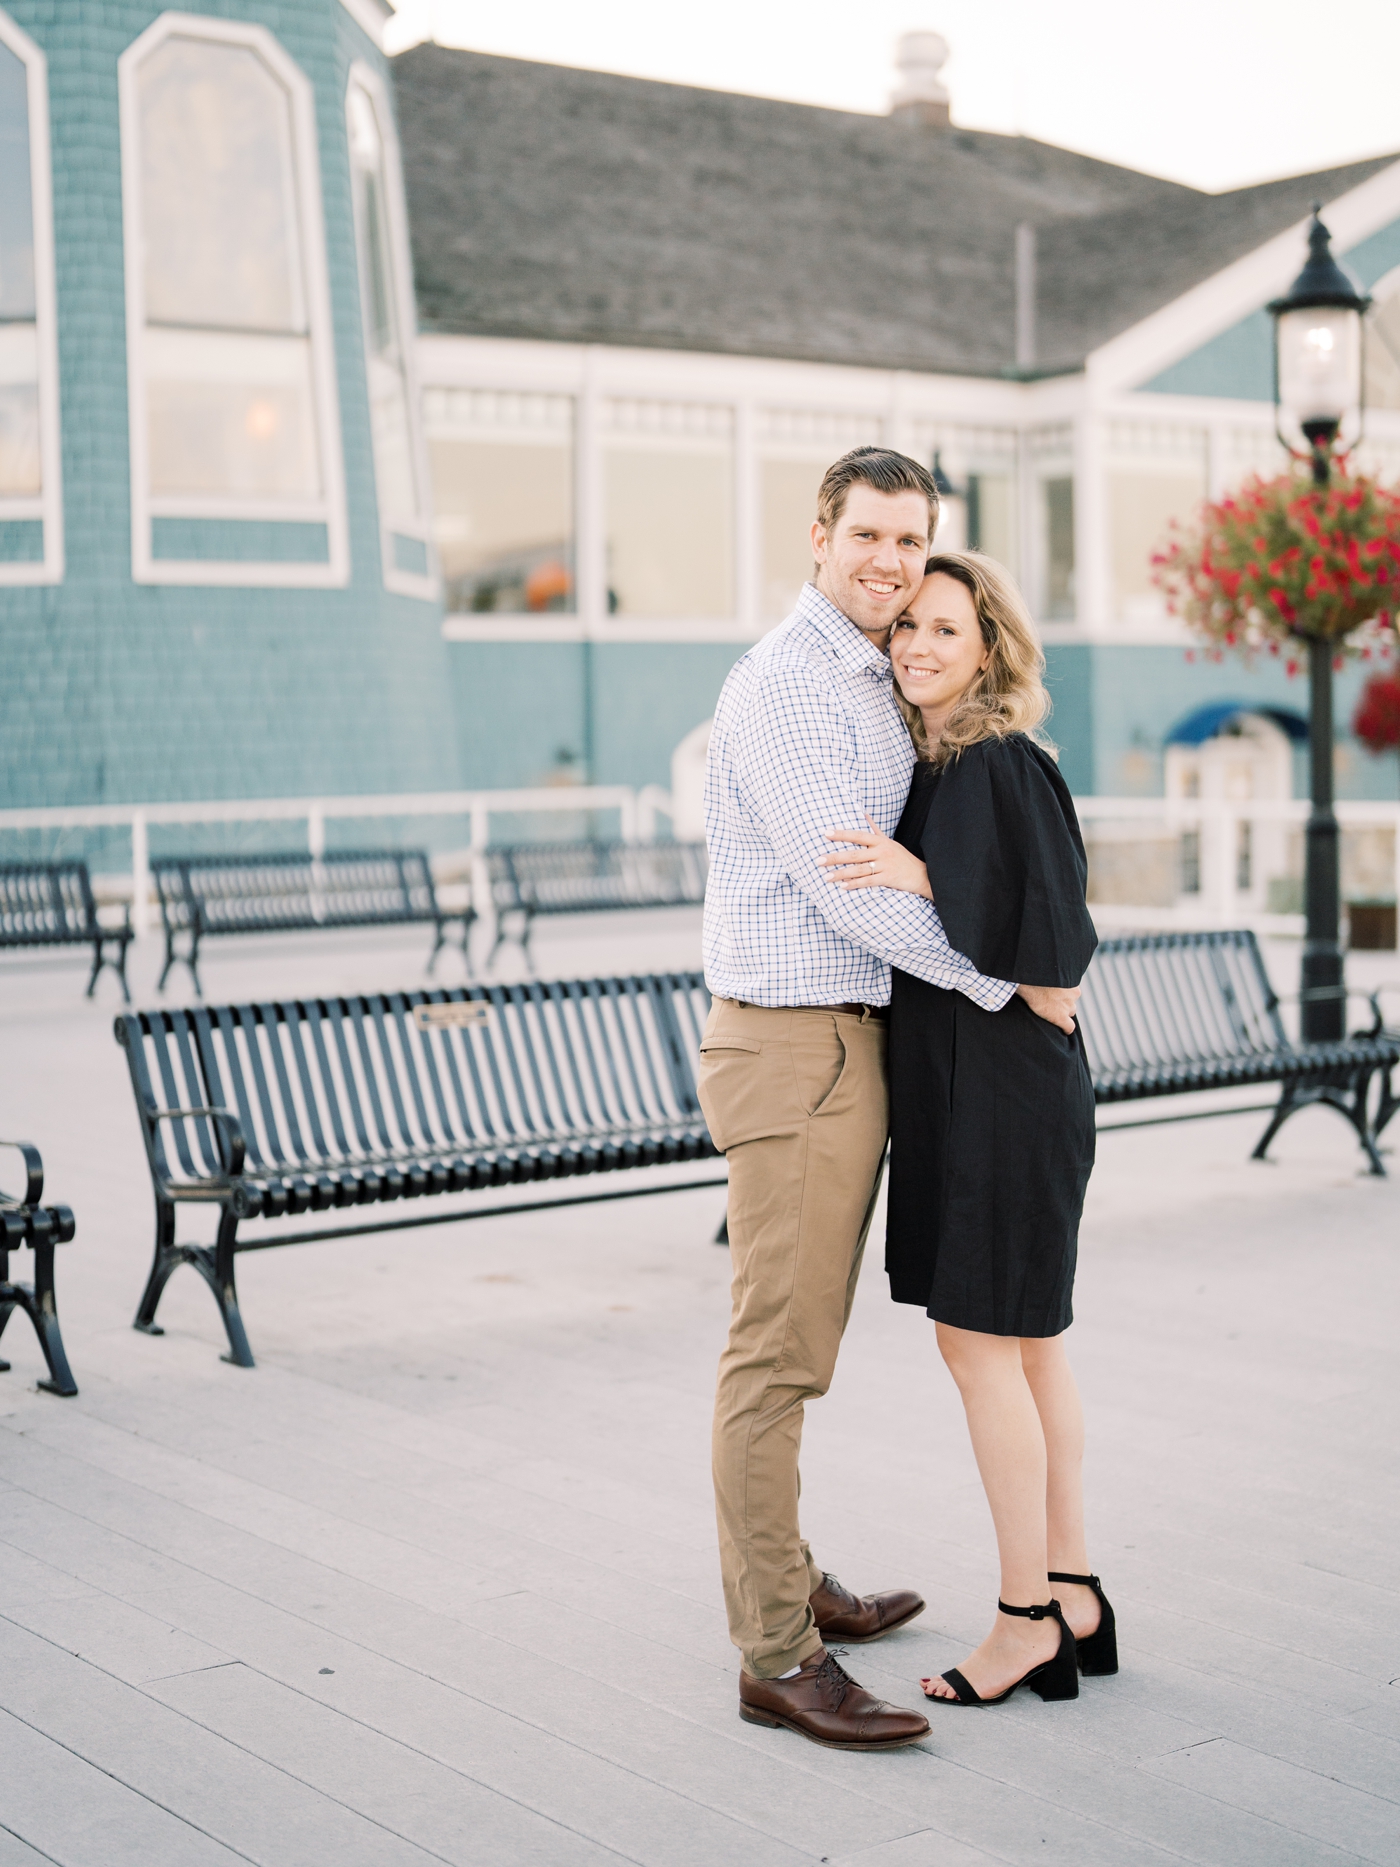 Couple in suit and dress smiles at the camera in old town alexandria waterfront